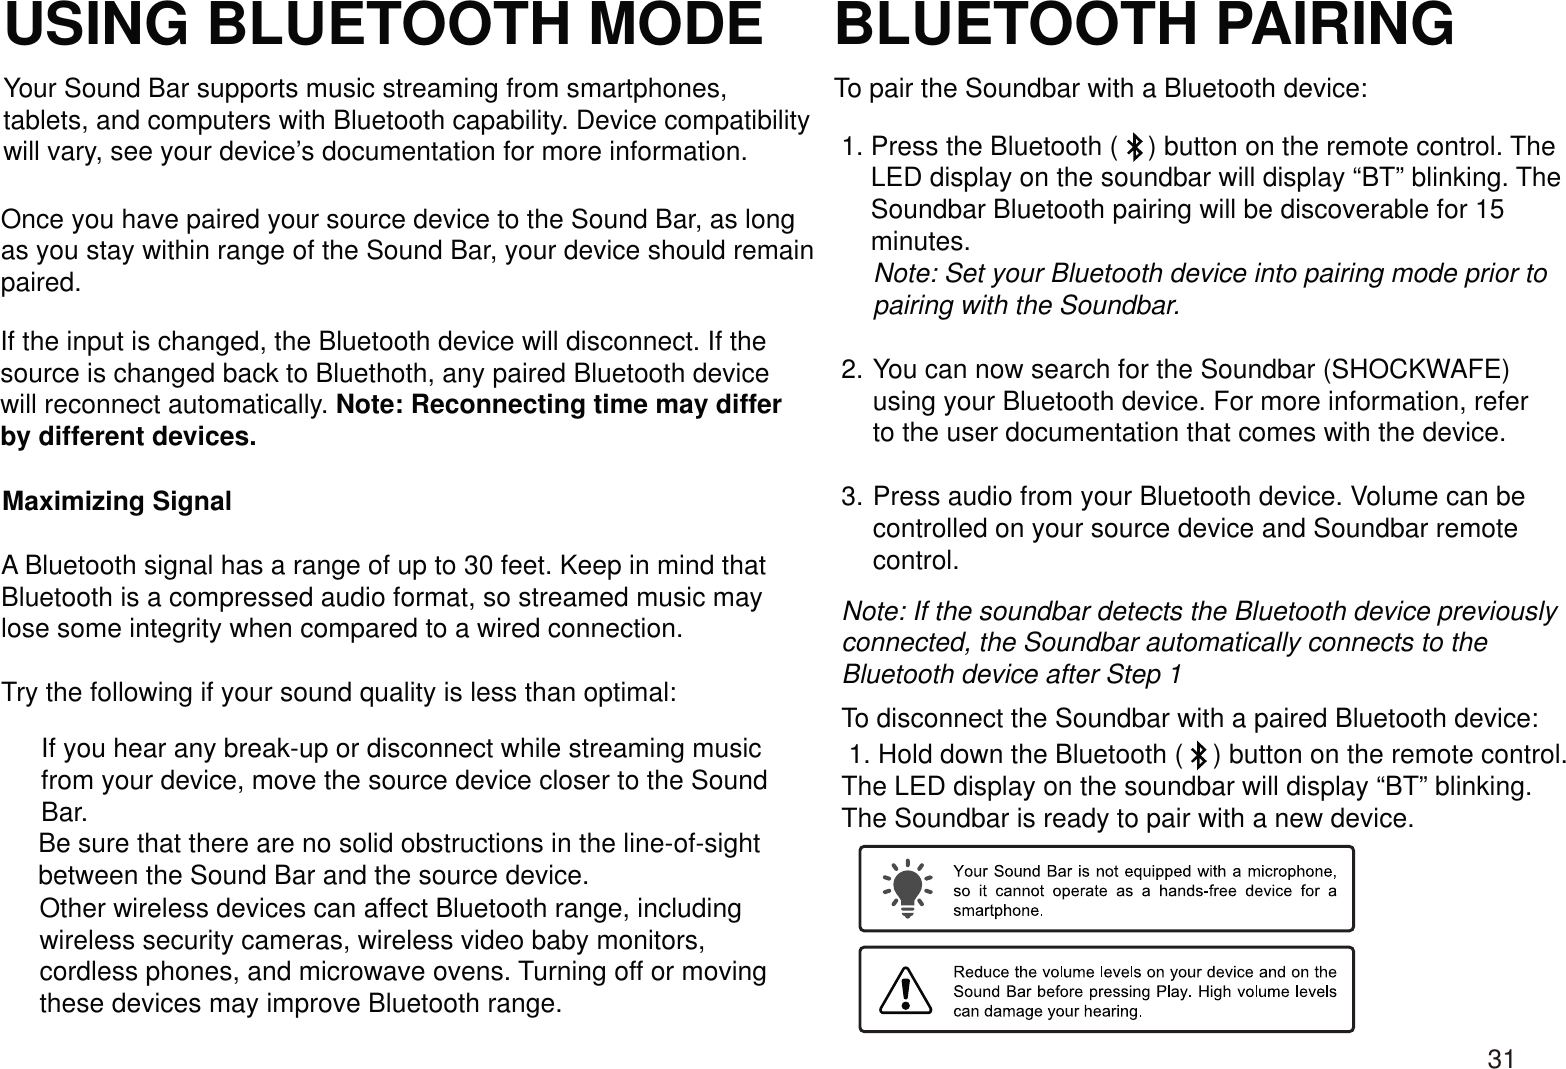 USING BLUETOOTH MODE BLUETOOTH PAIRINGYour Sound Bar supports music streaming from smartphones,tablets, and computers with Bluetooth capability. Device compatibility will vary, see your device’s documentation for more information.Once you have paired your source device to the Sound Bar, as longas you stay within range of the Sound Bar, your device should remain paired.If the input is changed, the Bluetooth device will disconnect. If the source is changed back to Bluethoth, any paired Bluetooth devicewill reconnect automatically. Note: Reconnecting time may differby different devices.A Bluetooth signal has a range of up to 30 feet. Keep in mind thatBluetooth is a compressed audio format, so streamed music maylose some integrity when compared to a wired connection.Try the following if your sound quality is less than optimal:If you hear any break-up or disconnect while streaming musicfrom your device, move the source device closer to the SoundBar.Other wireless devices can affect Bluetooth range, includingwireless security cameras, wireless video baby monitors, cordless phones, and microwave ovens. Turning off or movingthese devices may improve Bluetooth range.Maximizing SignalBe sure that there are no solid obstructions in the line-of-sightbetween the Sound Bar and the source device.To pair the Soundbar with a Bluetooth device: 1. Press the Bluetooth (    ) button on the remote control. The     LED display on the soundbar will display “BT” blinking. The     Soundbar Bluetooth pairing will be discoverable for 15     minutes.Note: Set your Bluetooth device into pairing mode prior to pairing with the Soundbar.You can now search for the Soundbar (SHOCKWAFE) using your Bluetooth device. For more information, refer to the user documentation that comes with the device.Press audio from your Bluetooth device. Volume can be controlled on your source device and Soundbar remote control.Note: If the soundbar detects the Bluetooth device previously connected, the Soundbar automatically connects to the Bluetooth device after Step 1To disconnect the Soundbar with a paired Bluetooth device: 1. Hold down the Bluetooth (    ) button on the remote control. The LED display on the soundbar will display “BT” blinking. The Soundbar is ready to pair with a new device.2.3.31